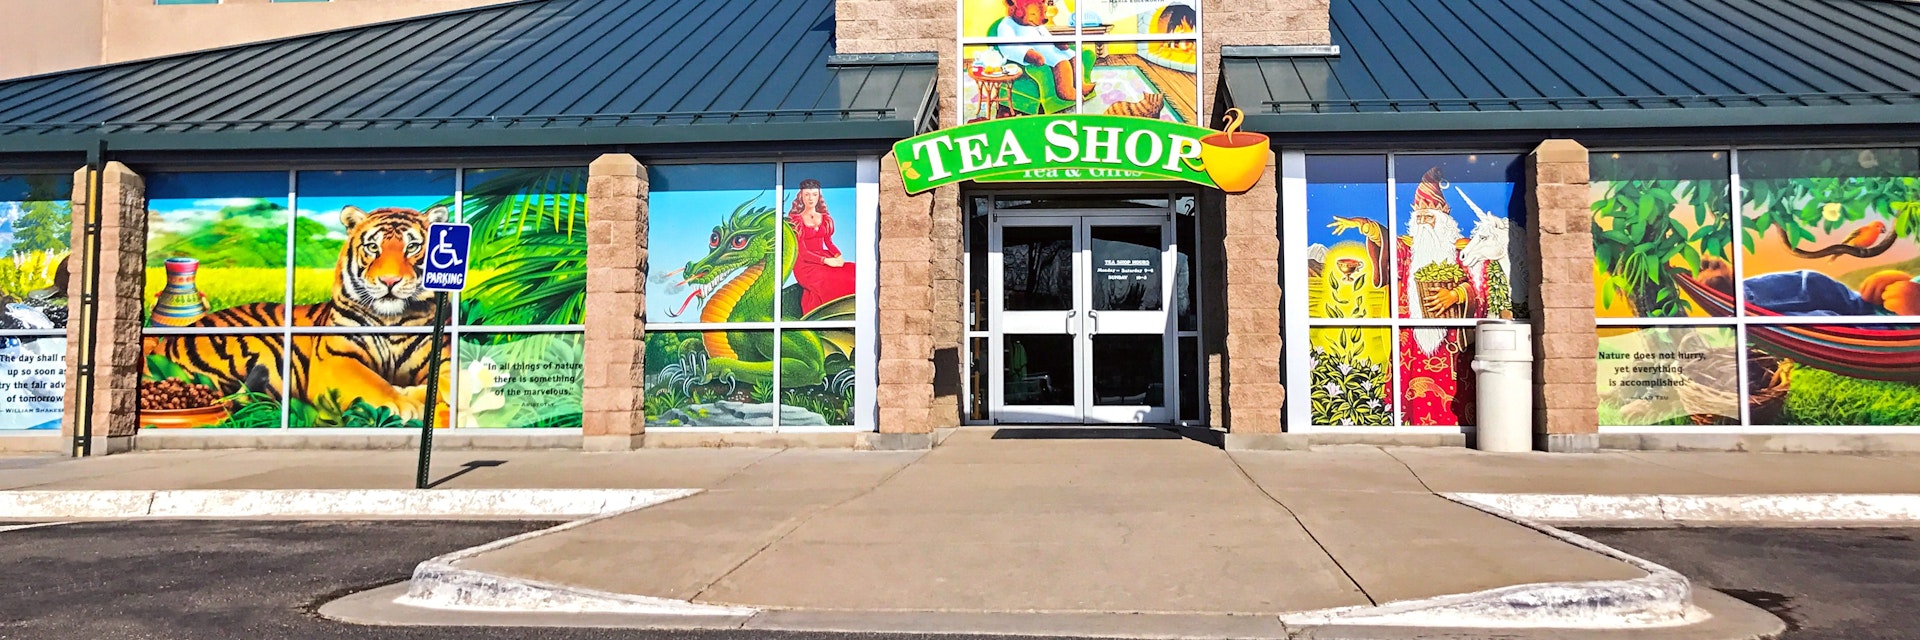 Boulder, Colorado / USA - March 30 2017: Celestial Seasonings Tea Shop Entrance. A popular tea company based out of Colorado offering free samples, tours, products and merchandise. ; Shutterstock ID 1741578521; your: Bridget Brown; gl: 65050; netsuite: Online Editorial; full: POI Image Update